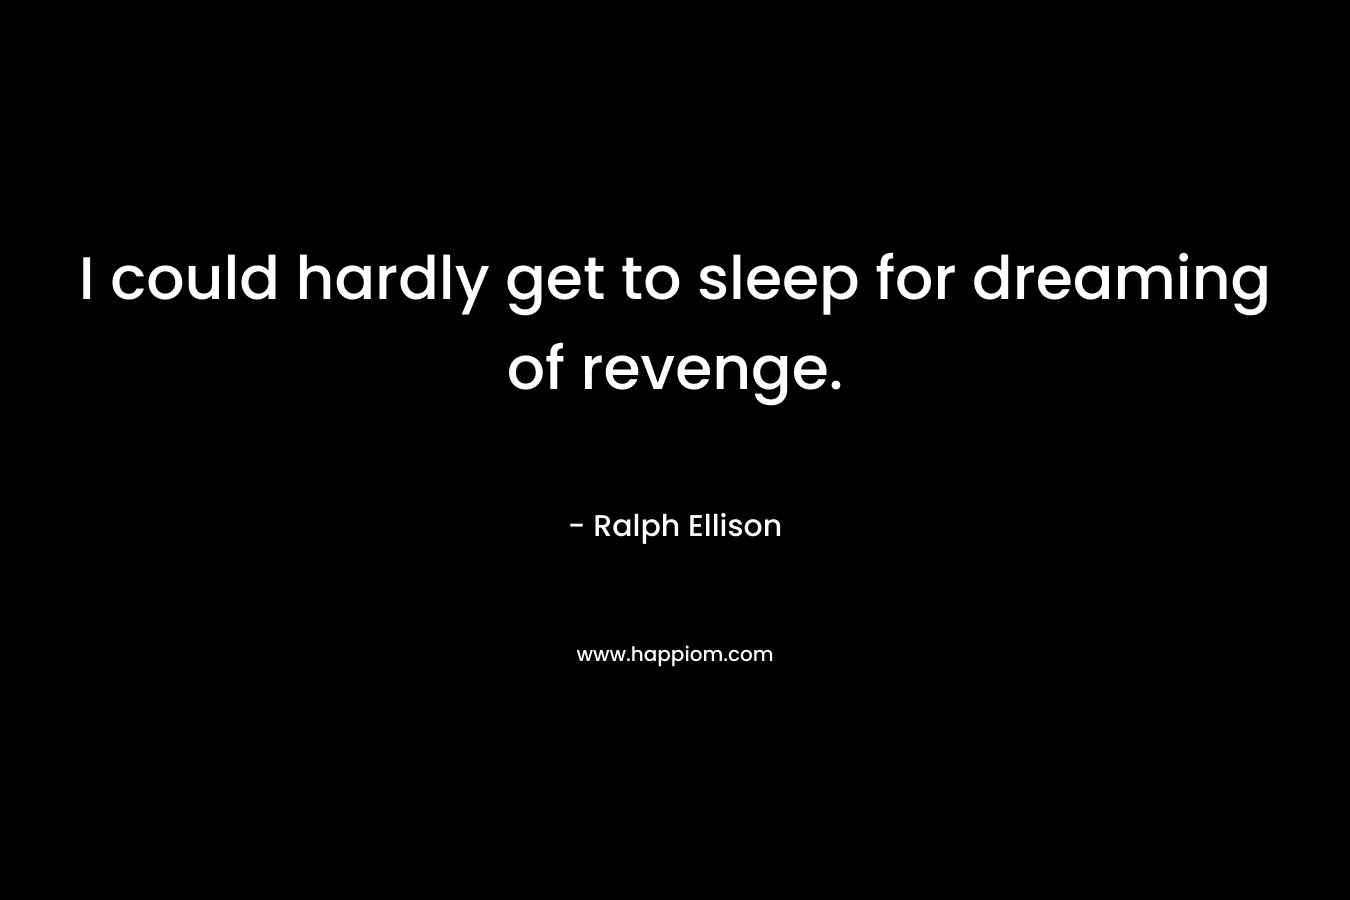 I could hardly get to sleep for dreaming of revenge.